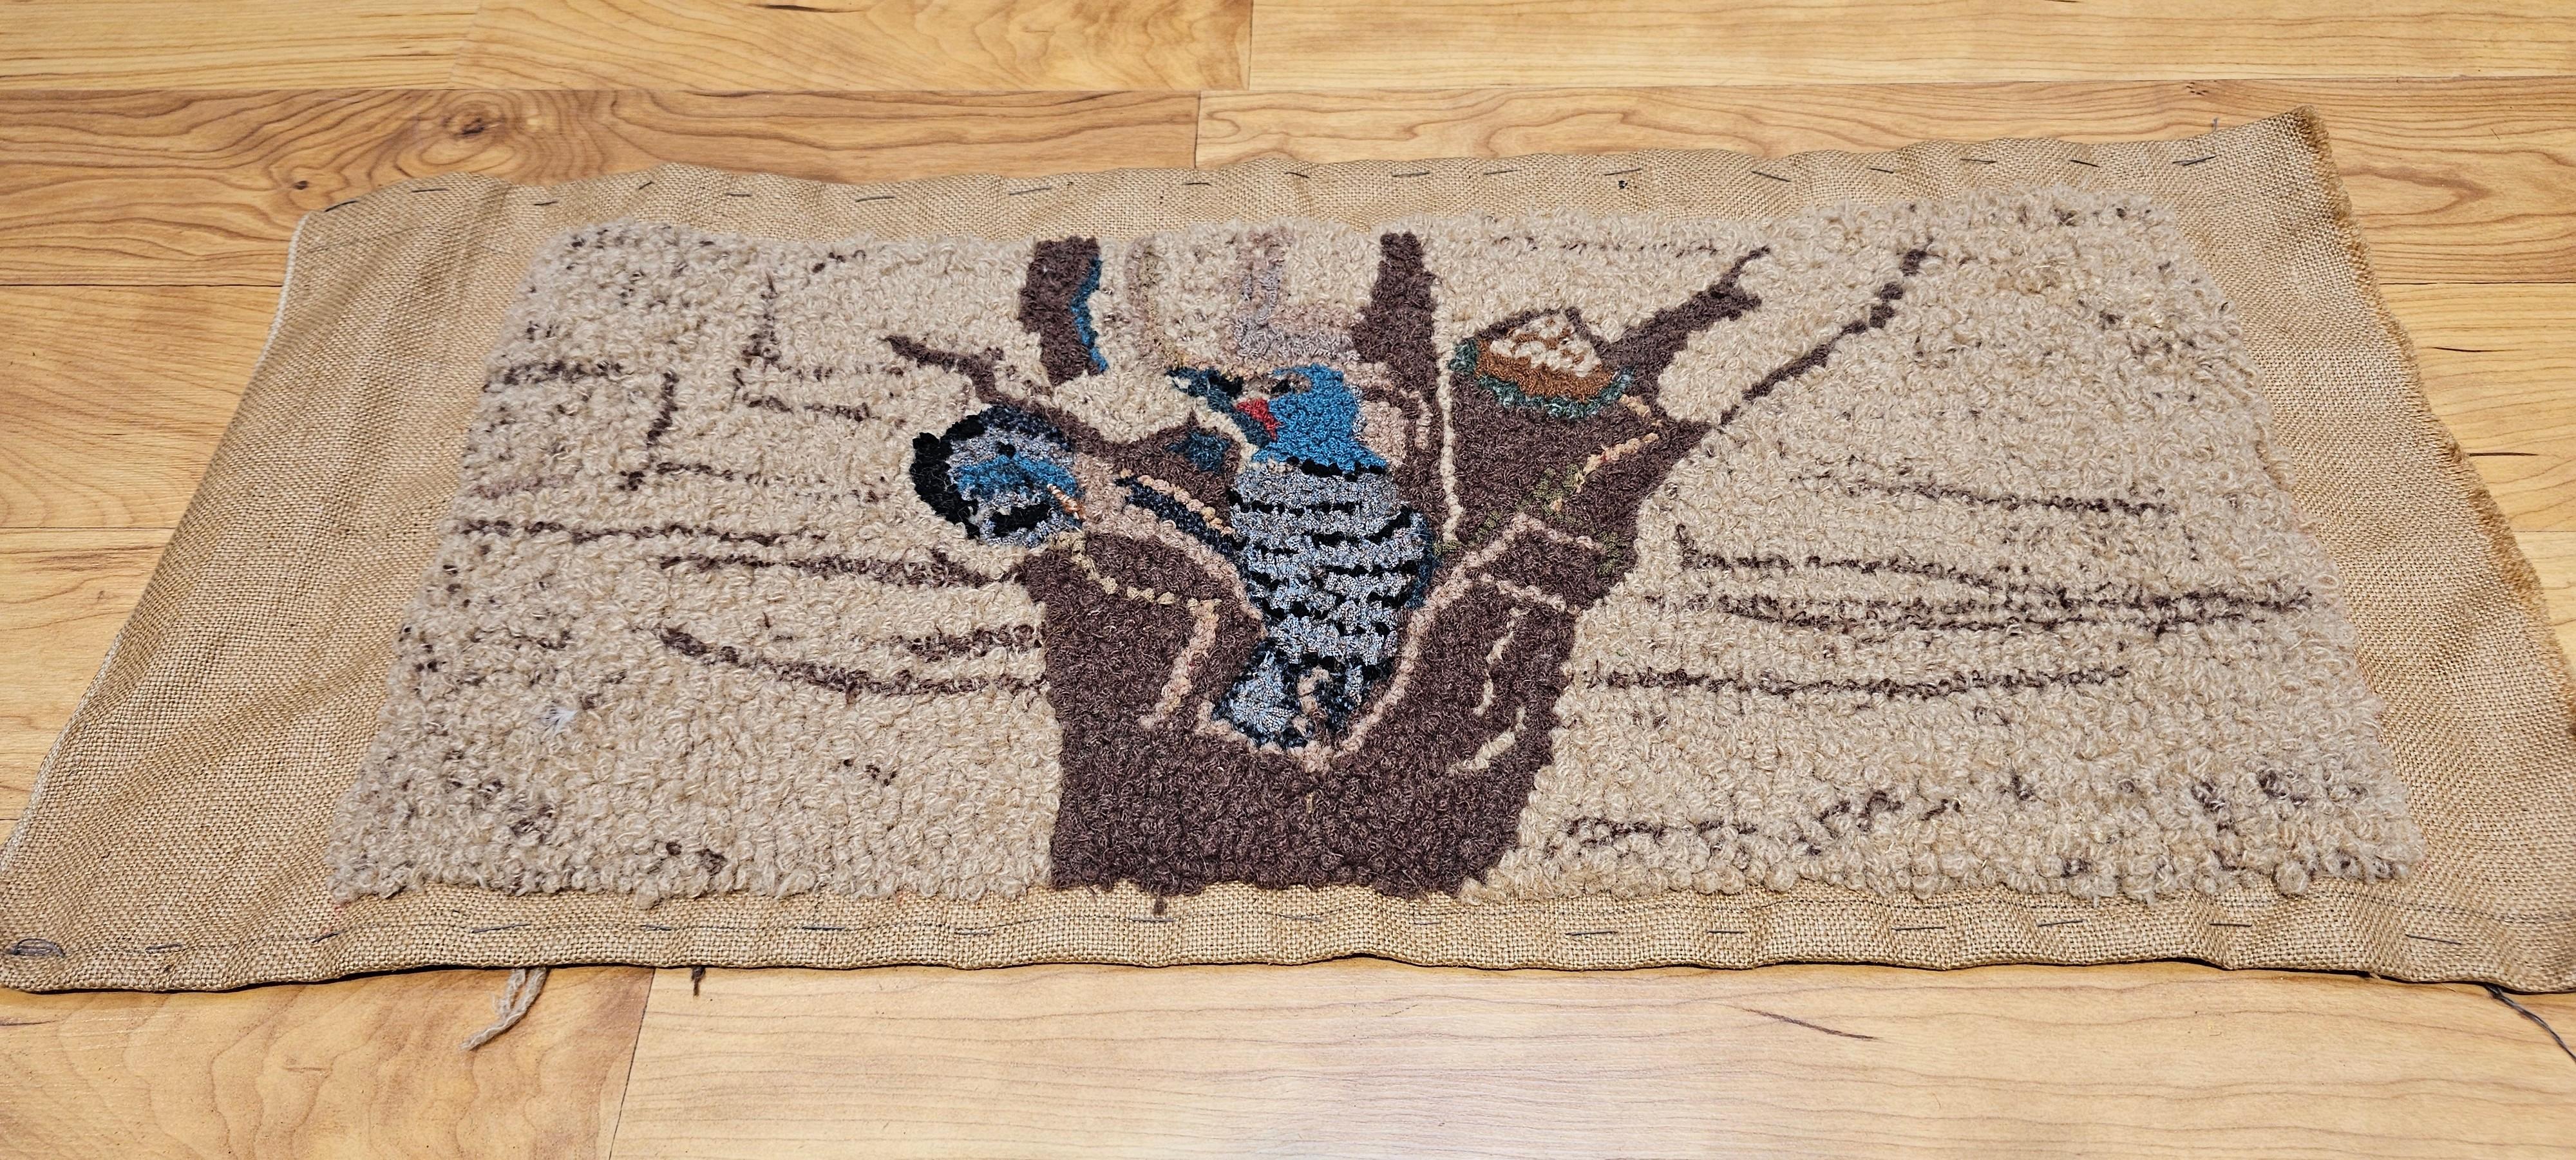 Vintage American hand hooked rug in a wonderful depiction of birds in a tree nest.  The rug has a delightful design and colors including brown, khaki, blue, and lavender.  Looking closely, you can see a mother bird trying to feed her chick in the